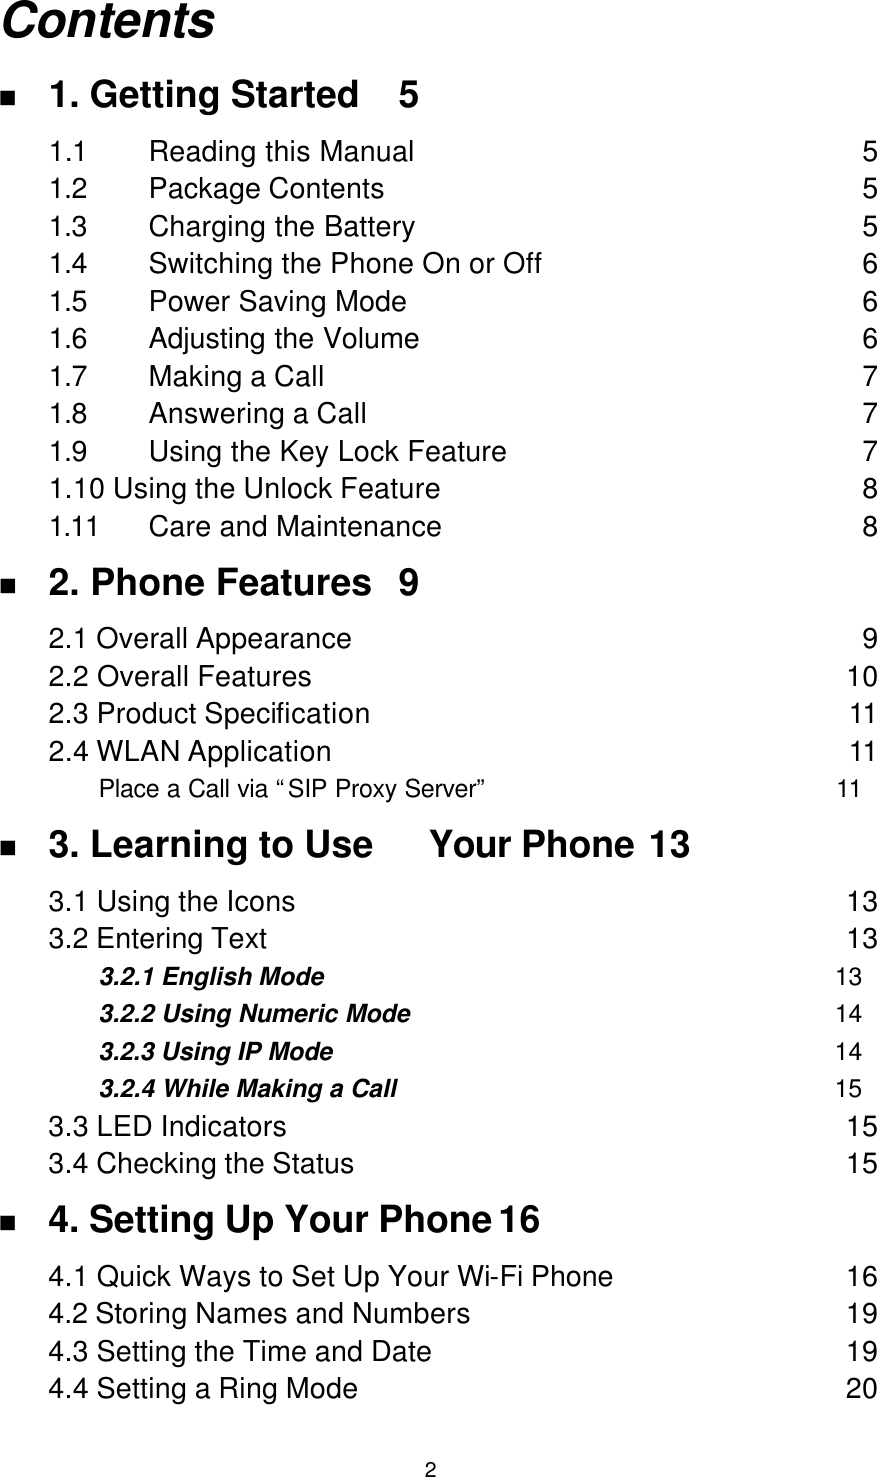  2 Contents n 1. Getting Started 5 1.1 Reading this Manual 5 1.2 Package Contents 5 1.3 Charging the Battery 5 1.4 Switching the Phone On or Off 6 1.5 Power Saving Mode 6 1.6 Adjusting the Volume 6 1.7 Making a Call 7 1.8 Answering a Call 7 1.9 Using the Key Lock Feature 7 1.10 Using the Unlock Feature 8 1.11 Care and Maintenance 8 n 2. Phone Features 9 2.1 Overall Appearance 9 2.2 Overall Features 10 2.3 Product Specification 11 2.4 WLAN Application 11 Place a Call via “SIP Proxy Server” 11 n 3. Learning to Use   Your Phone 13 3.1 Using the Icons 13 3.2 Entering Text 13 3.2.1 English Mode 13 3.2.2 Using Numeric Mode 14 3.2.3 Using IP Mode 14 3.2.4 While Making a Call 15 3.3 LED Indicators 15 3.4 Checking the Status 15 n 4. Setting Up Your Phone 16 4.1 Quick Ways to Set Up Your Wi-Fi Phone 16 4.2 Storing Names and Numbers 19 4.3 Setting the Time and Date 19 4.4 Setting a Ring Mode 20 